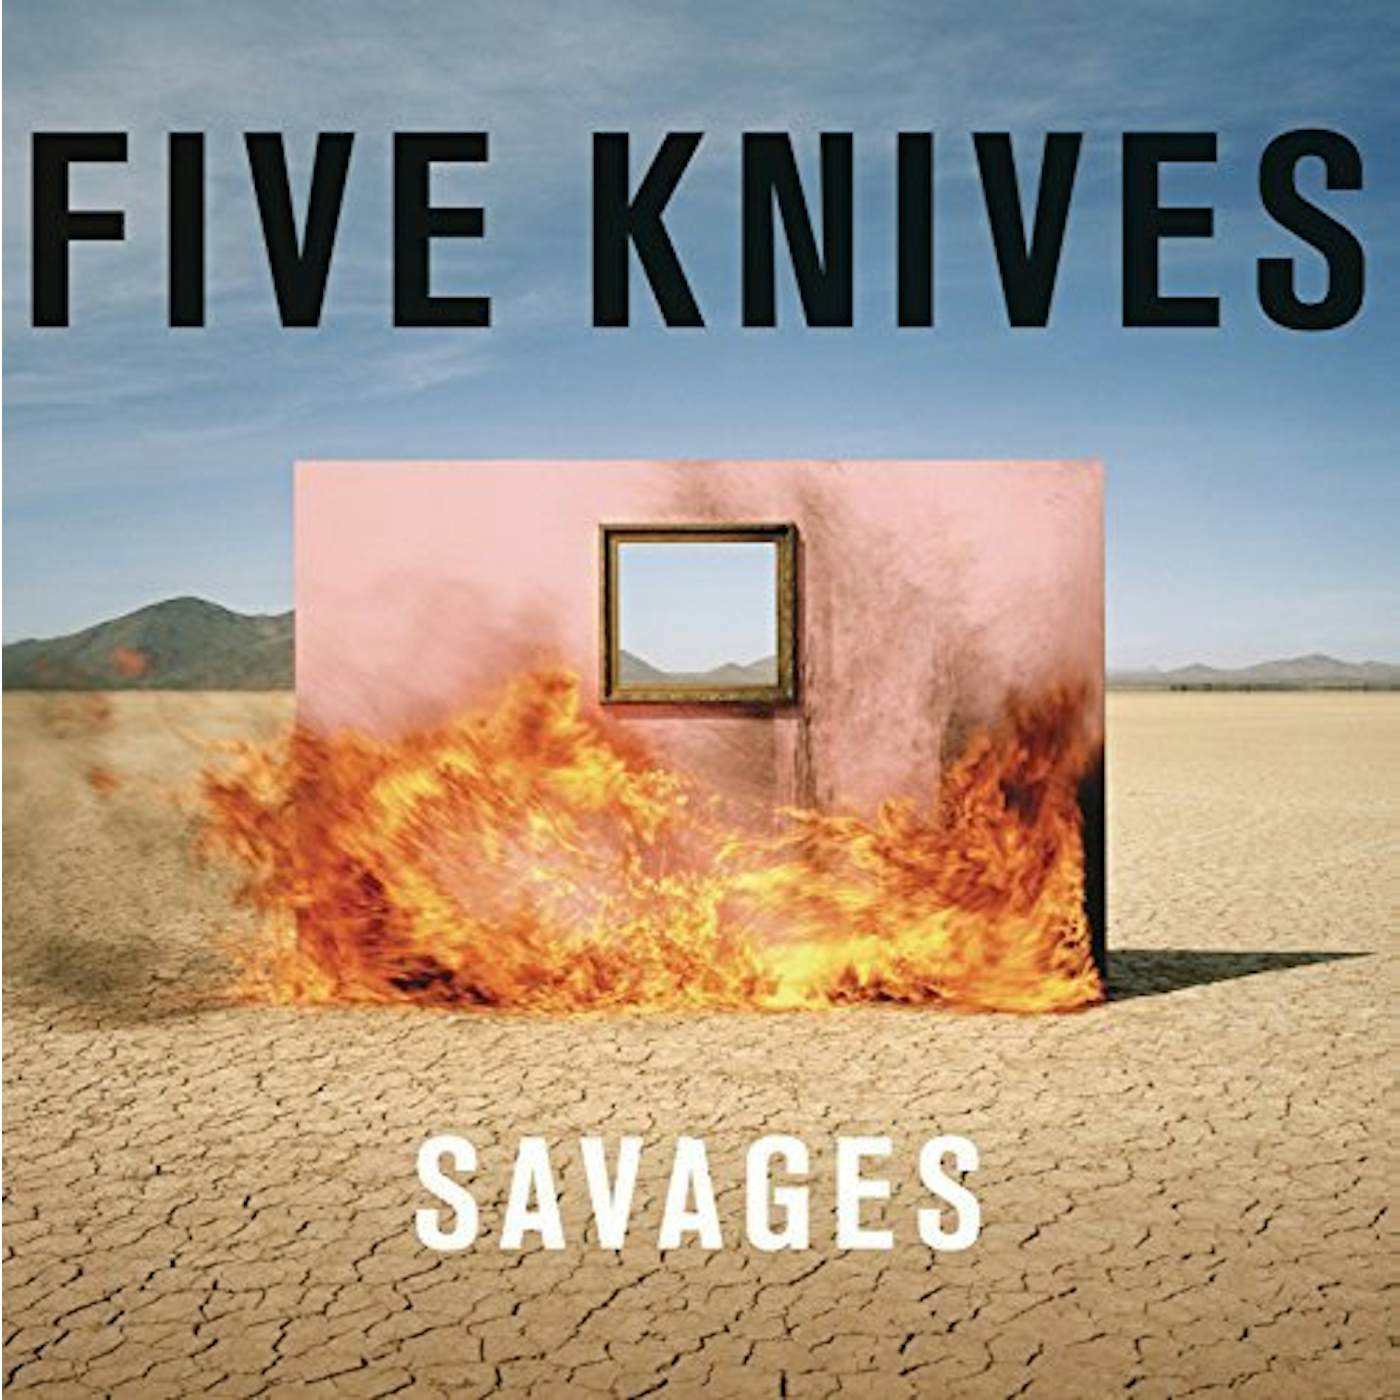 Five Knives SAVAGES CD